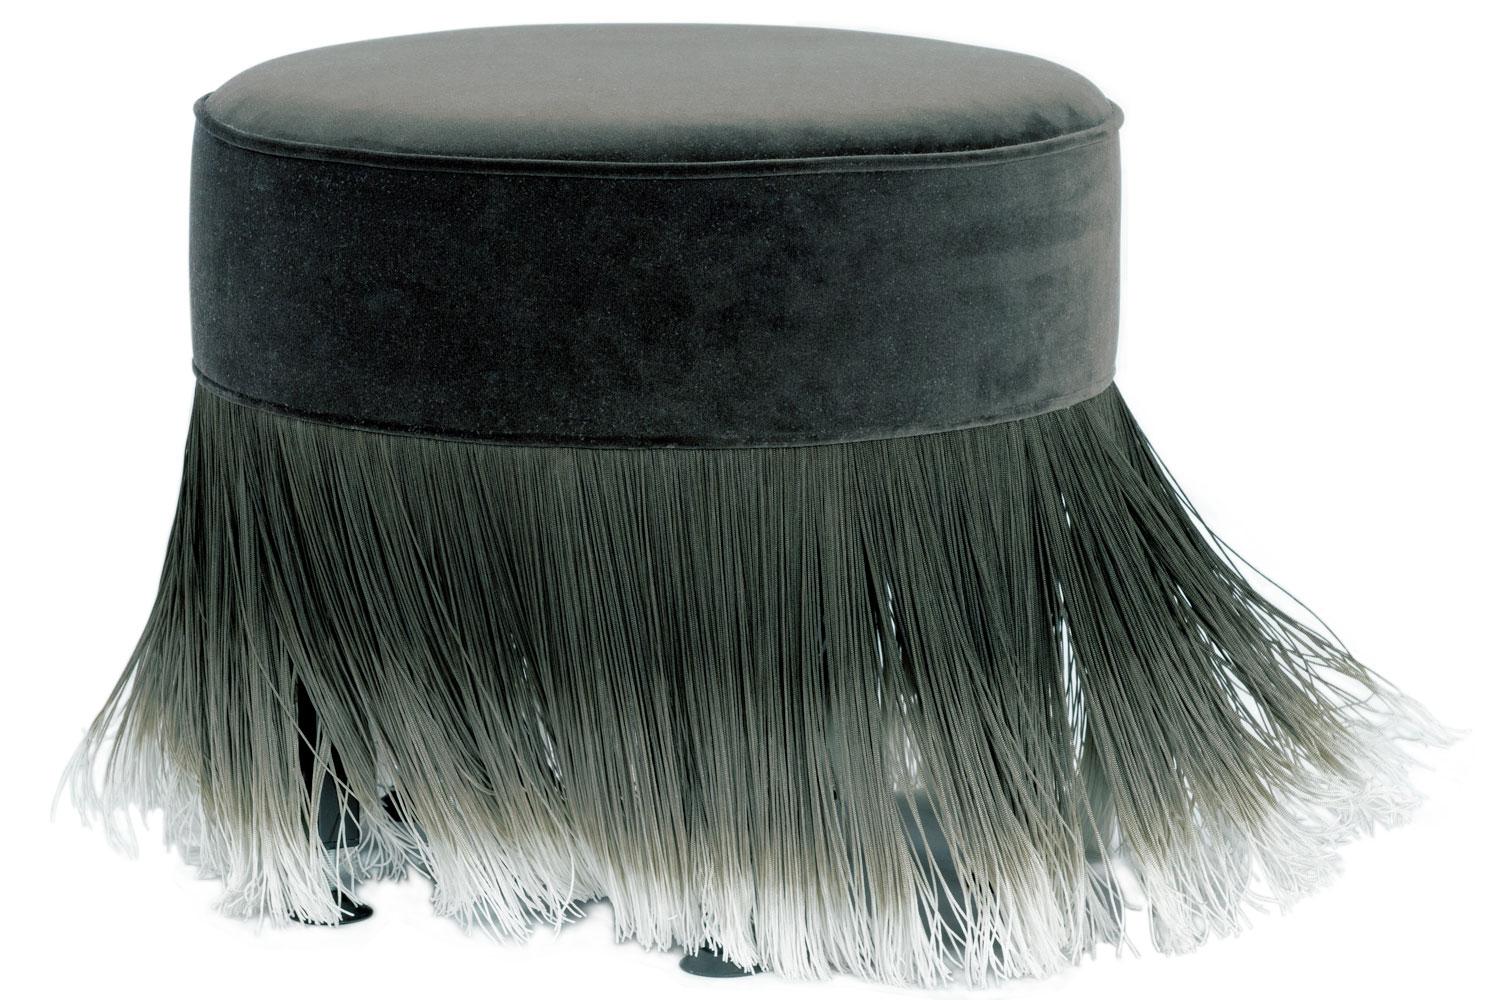 Dark Gray Velvet Small Anami Pouf By Moooi

This Amami pouf from Moooi is simply irresistable. Dressed in dark gray velvet, softly floating on long sensuous fringes makes this pouf a fresh breeze of lightness all around the room.

Wooden frame,